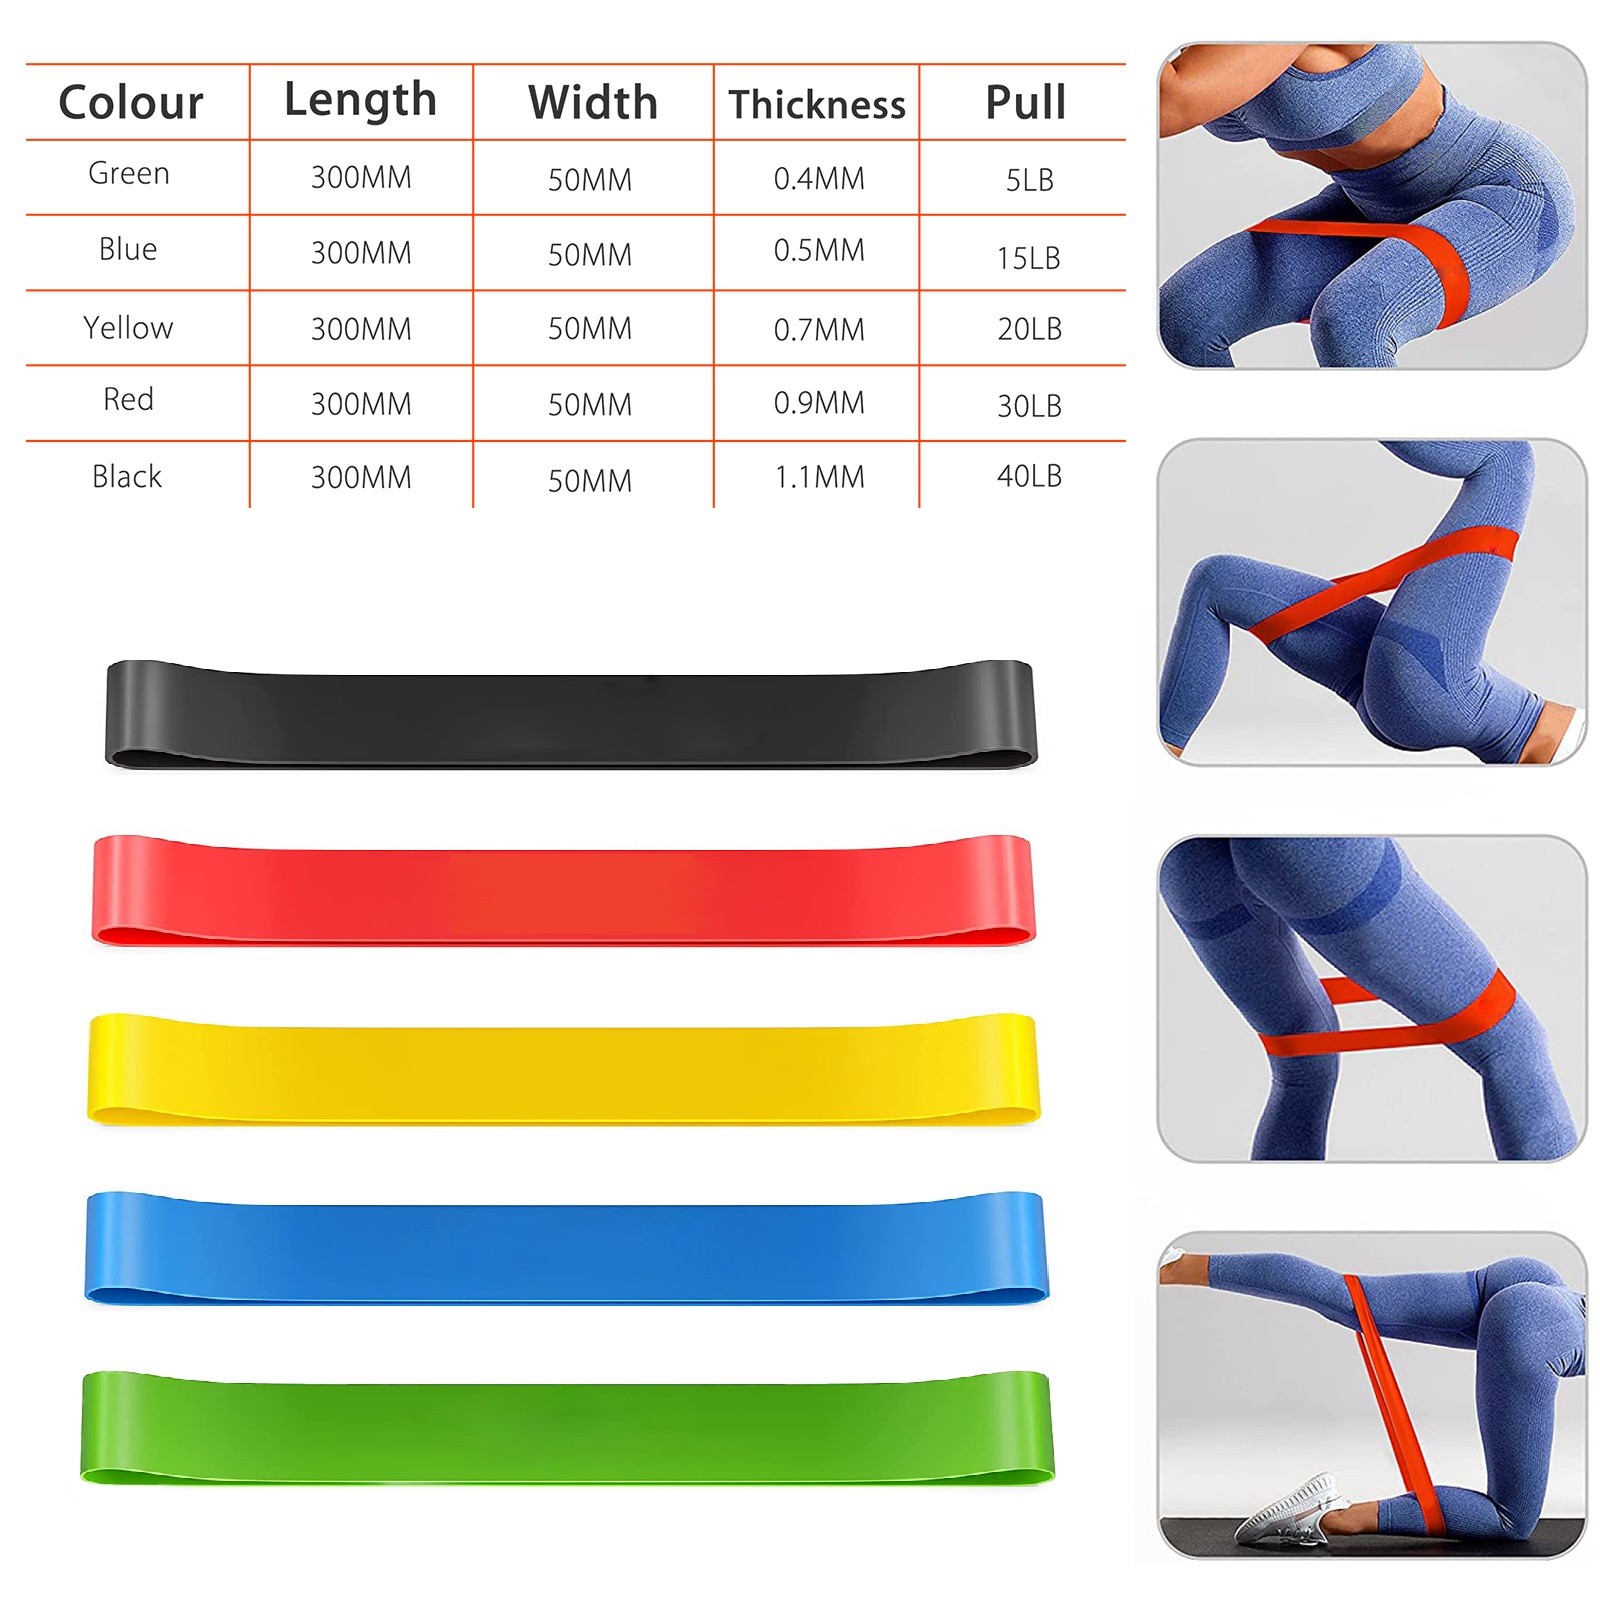 (5-Pack)Heavy Duty Resistance Loop Band, EEEkit Fitness Exercise Bands for Strength Training Working Out, Physical Therapy, Muscle Training, Lose Weight - image 2 of 9